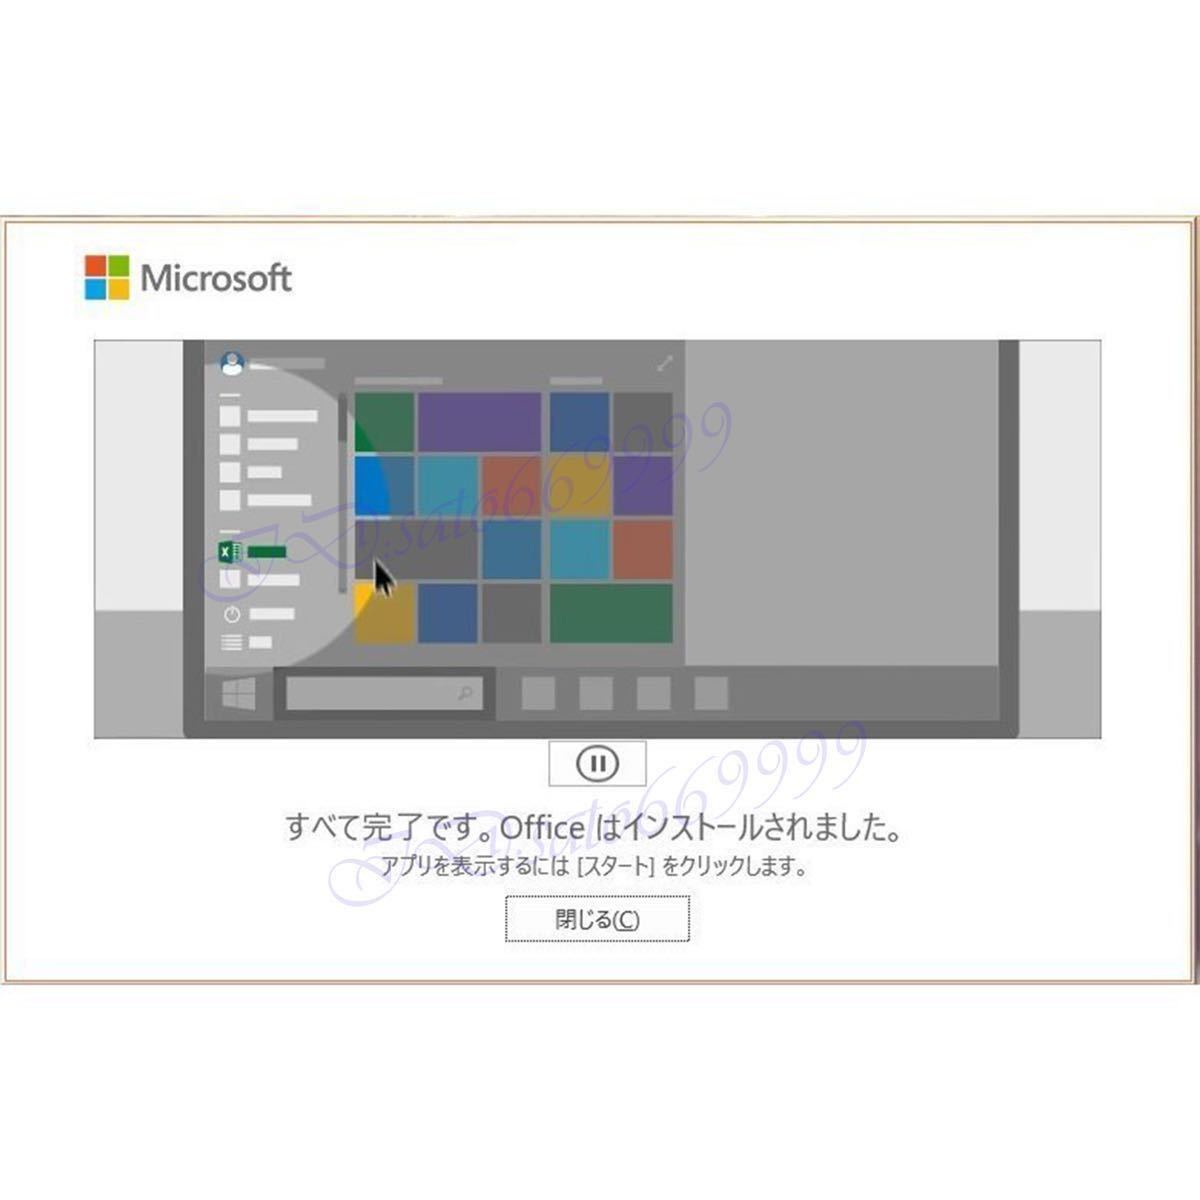 Microsoft Office 2021 Professional Plus 永年正規品プロダクトキー☆ Access Word Excel PowerPoint 認証保証 日本語 手順書付き 火_画像4